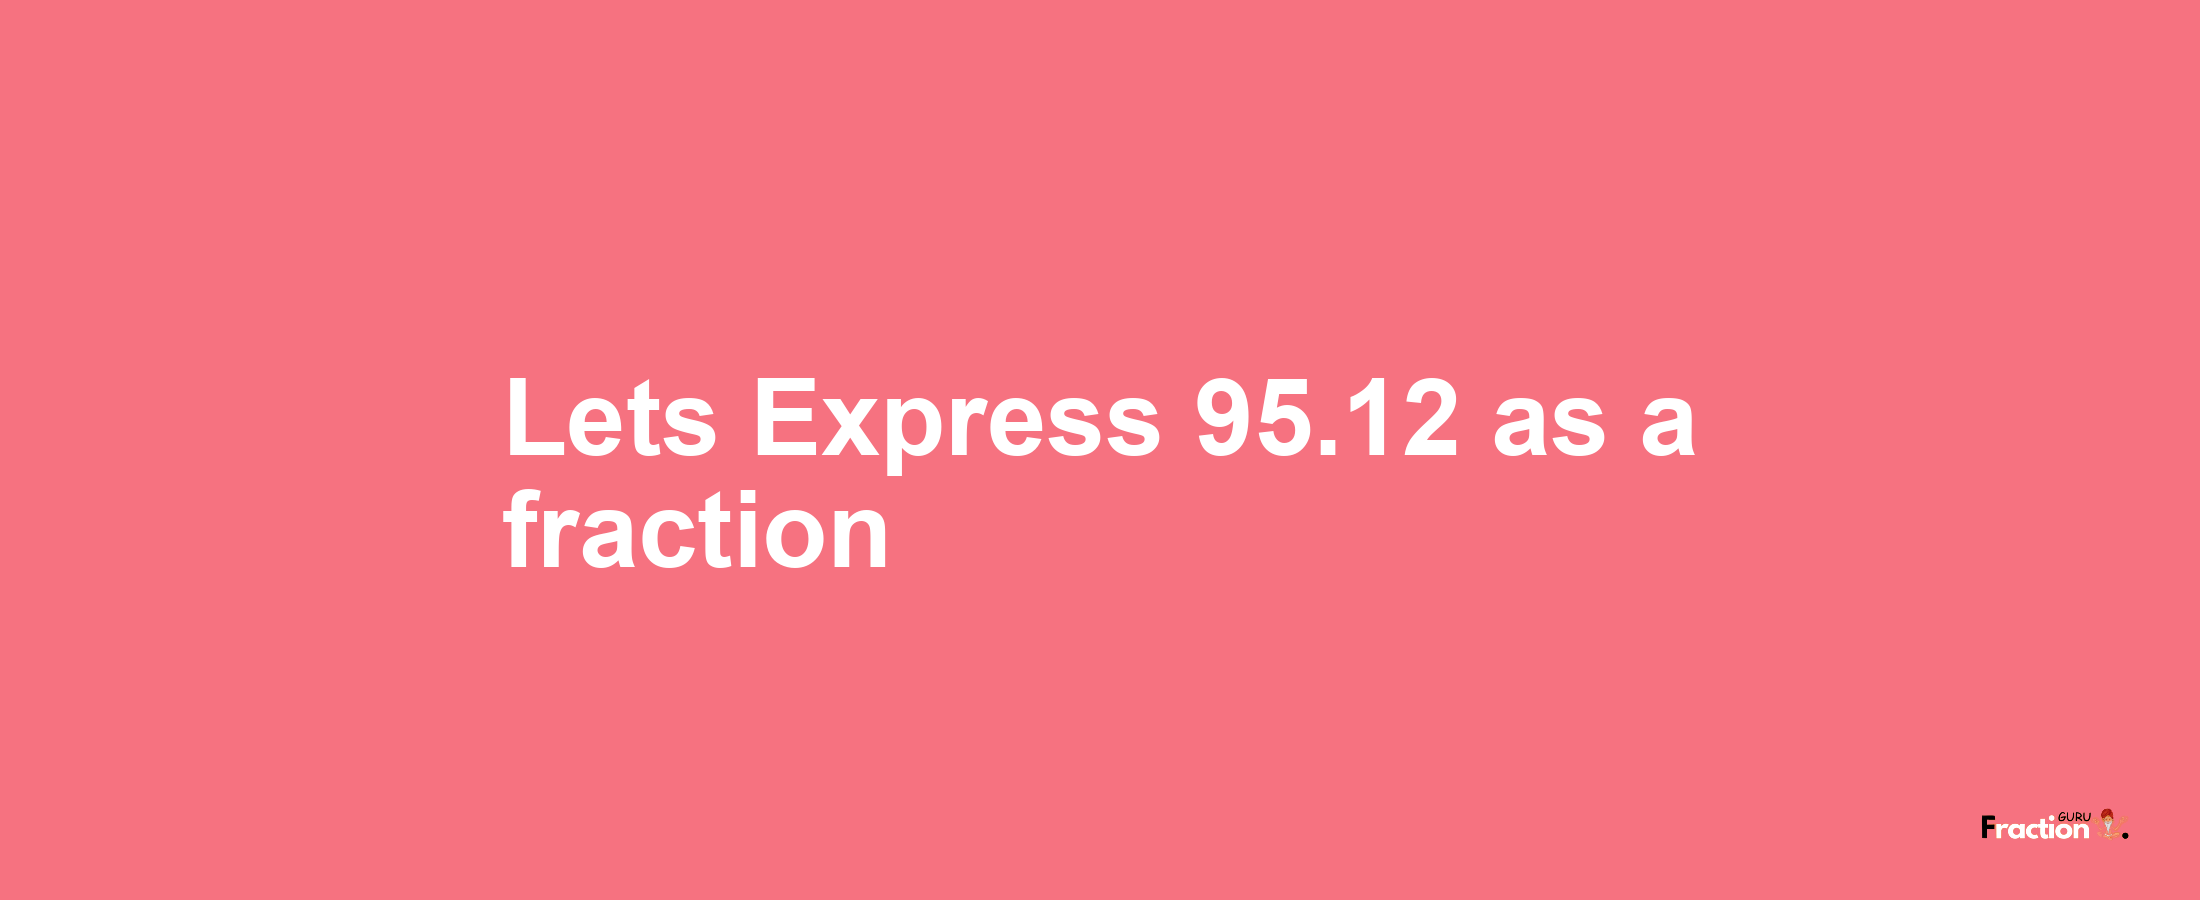 Lets Express 95.12 as afraction